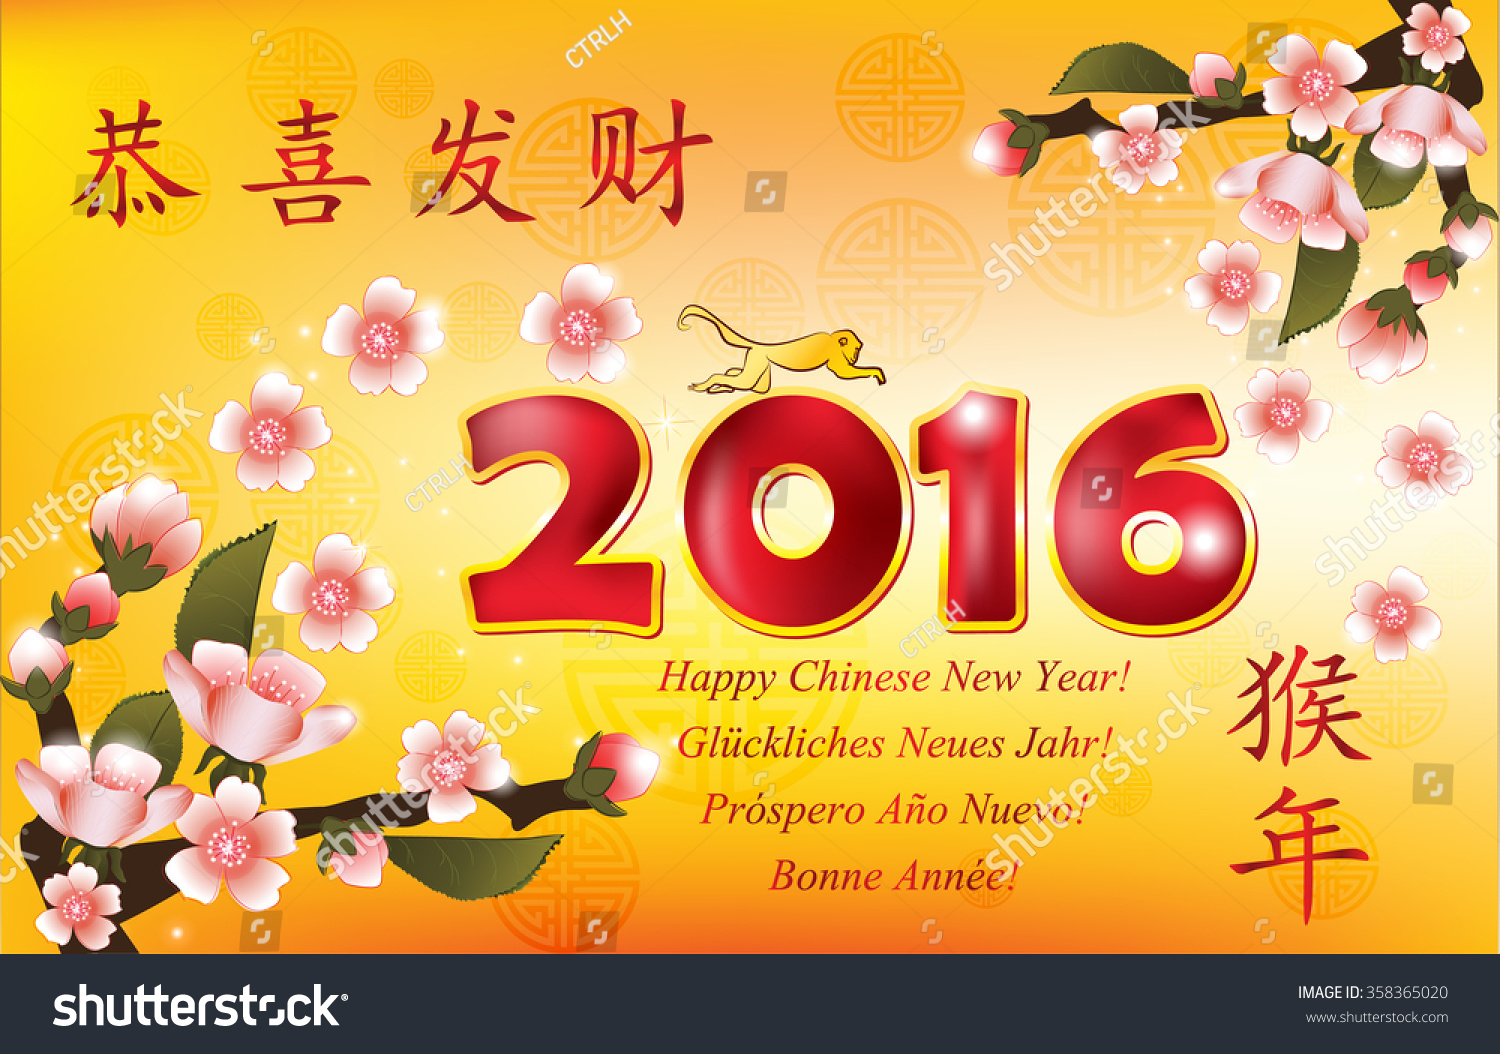 2016 Chinese New Year Greeting Card In Many Languages. Text Translation